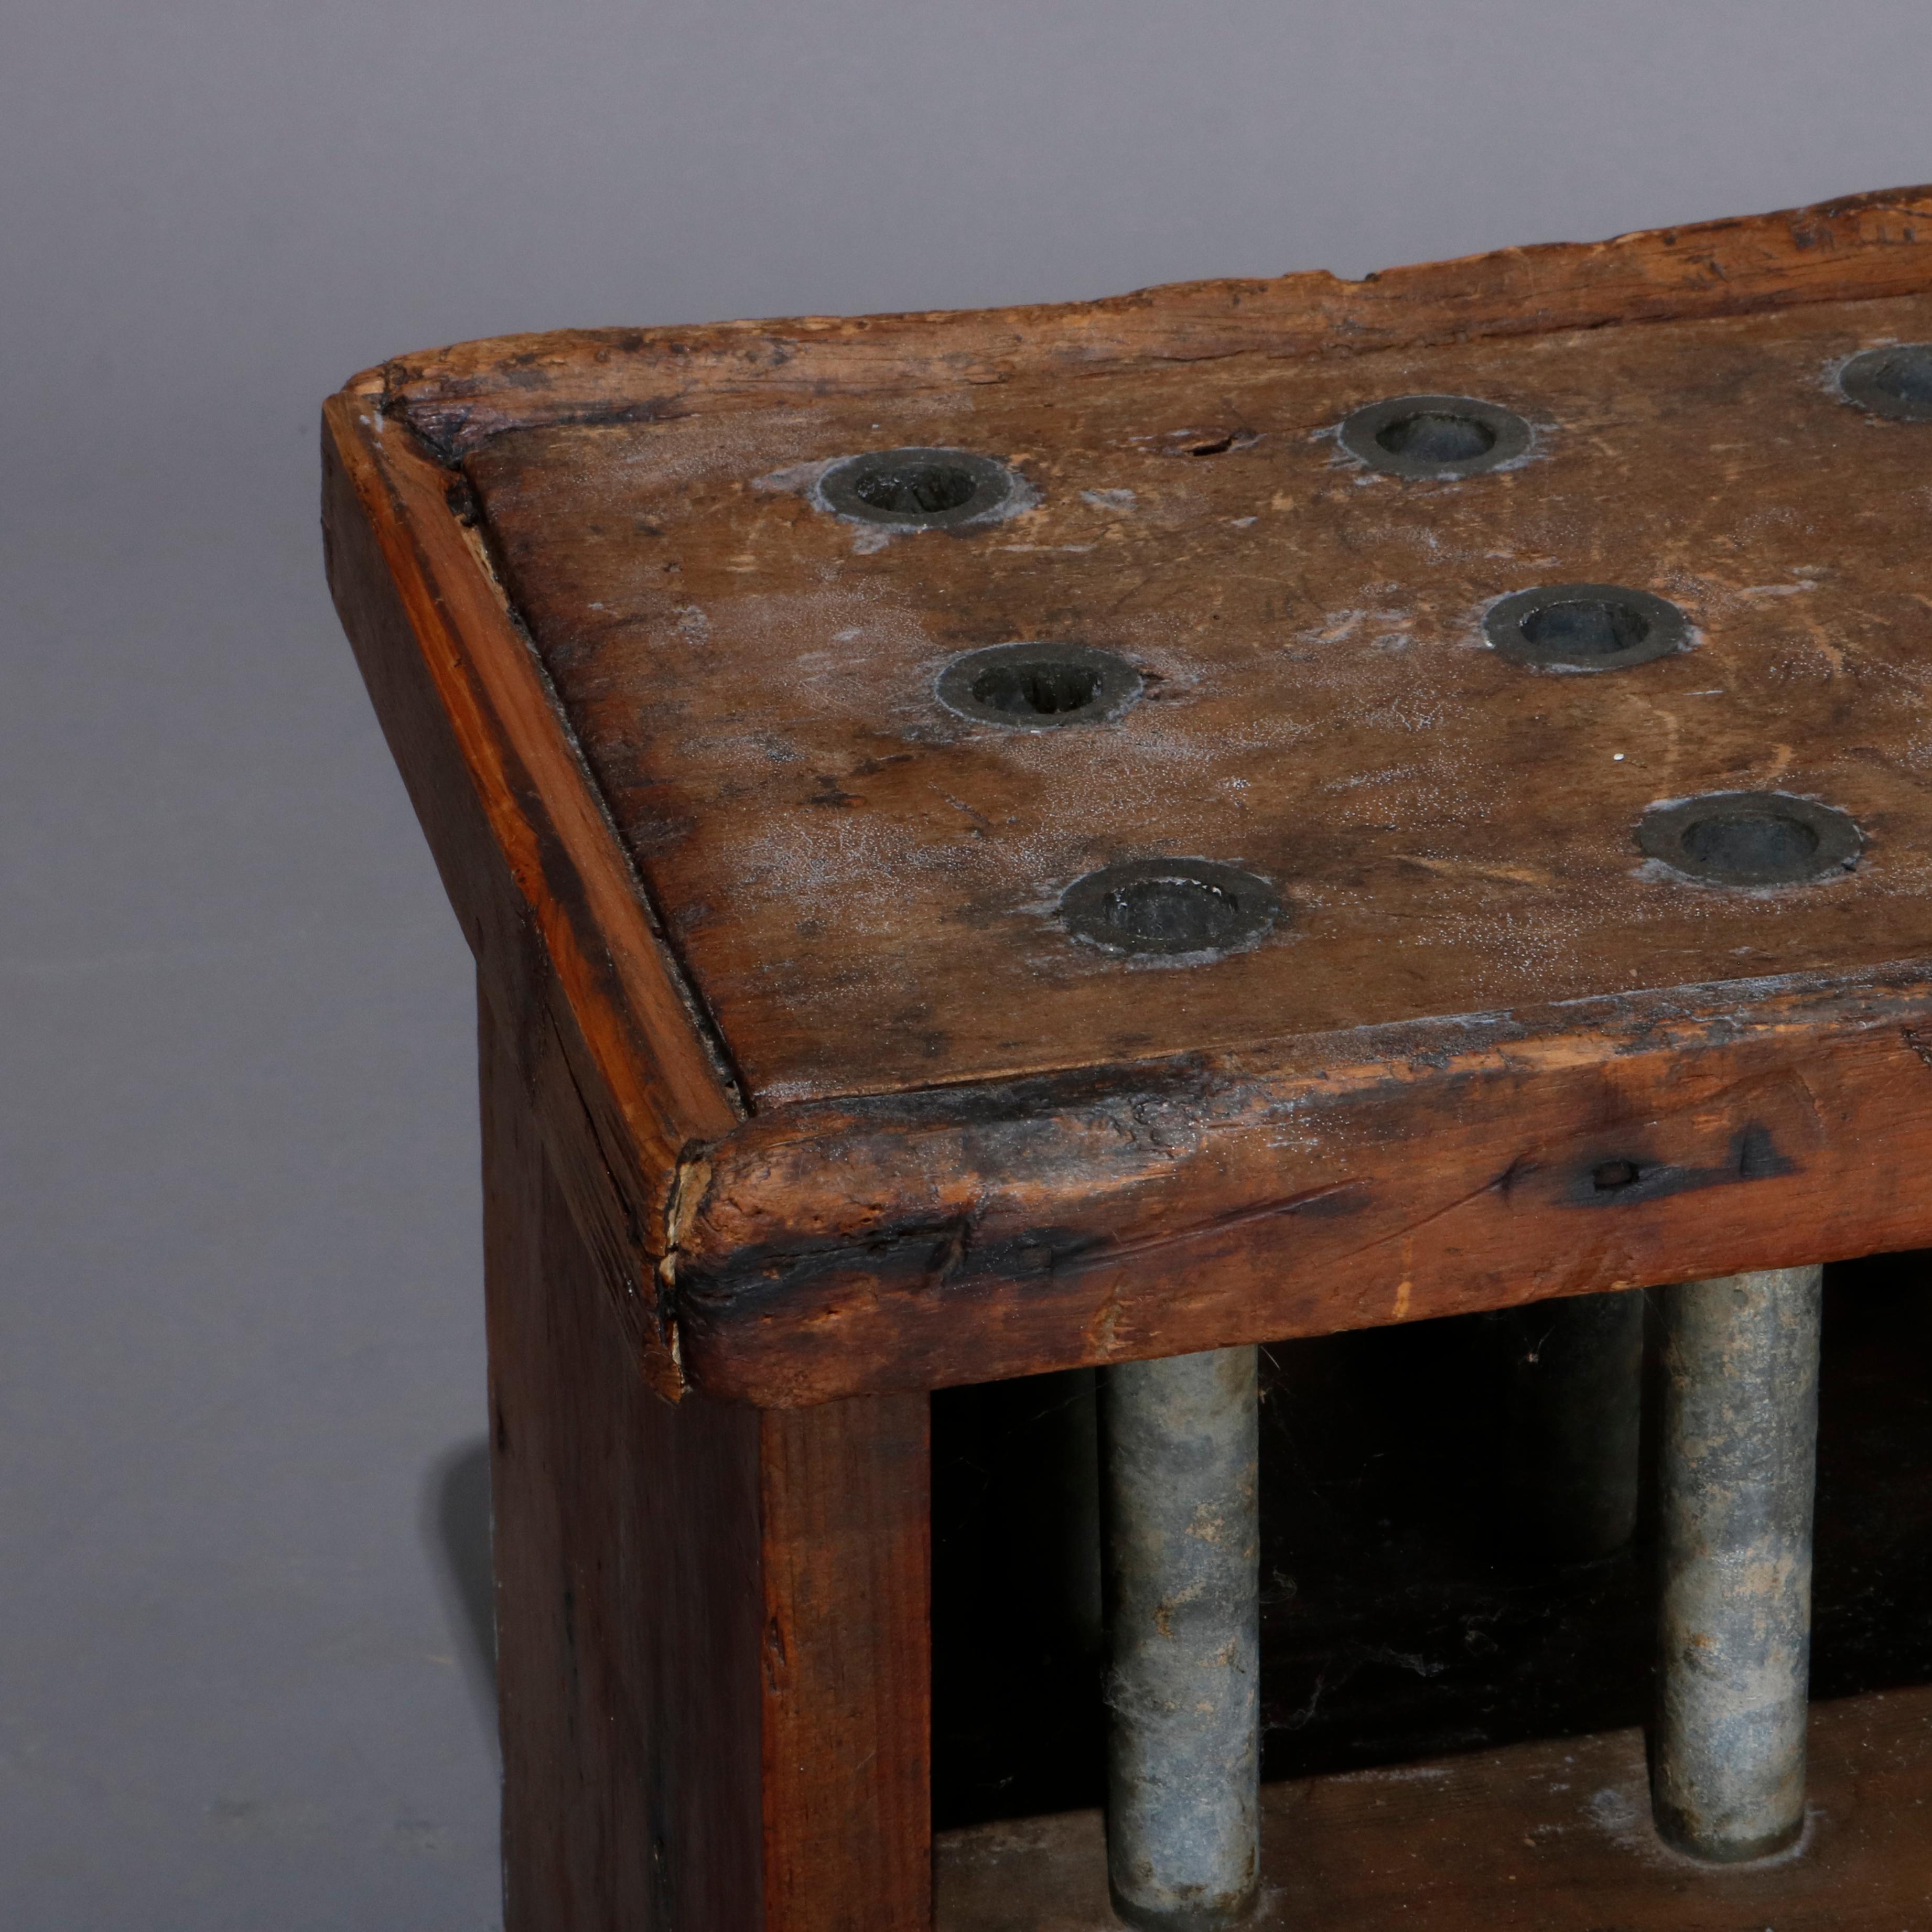 An antique Colonial candle mold of the period offers wooden frame with 21 tin candle molds, 18th century.

Measures: 16